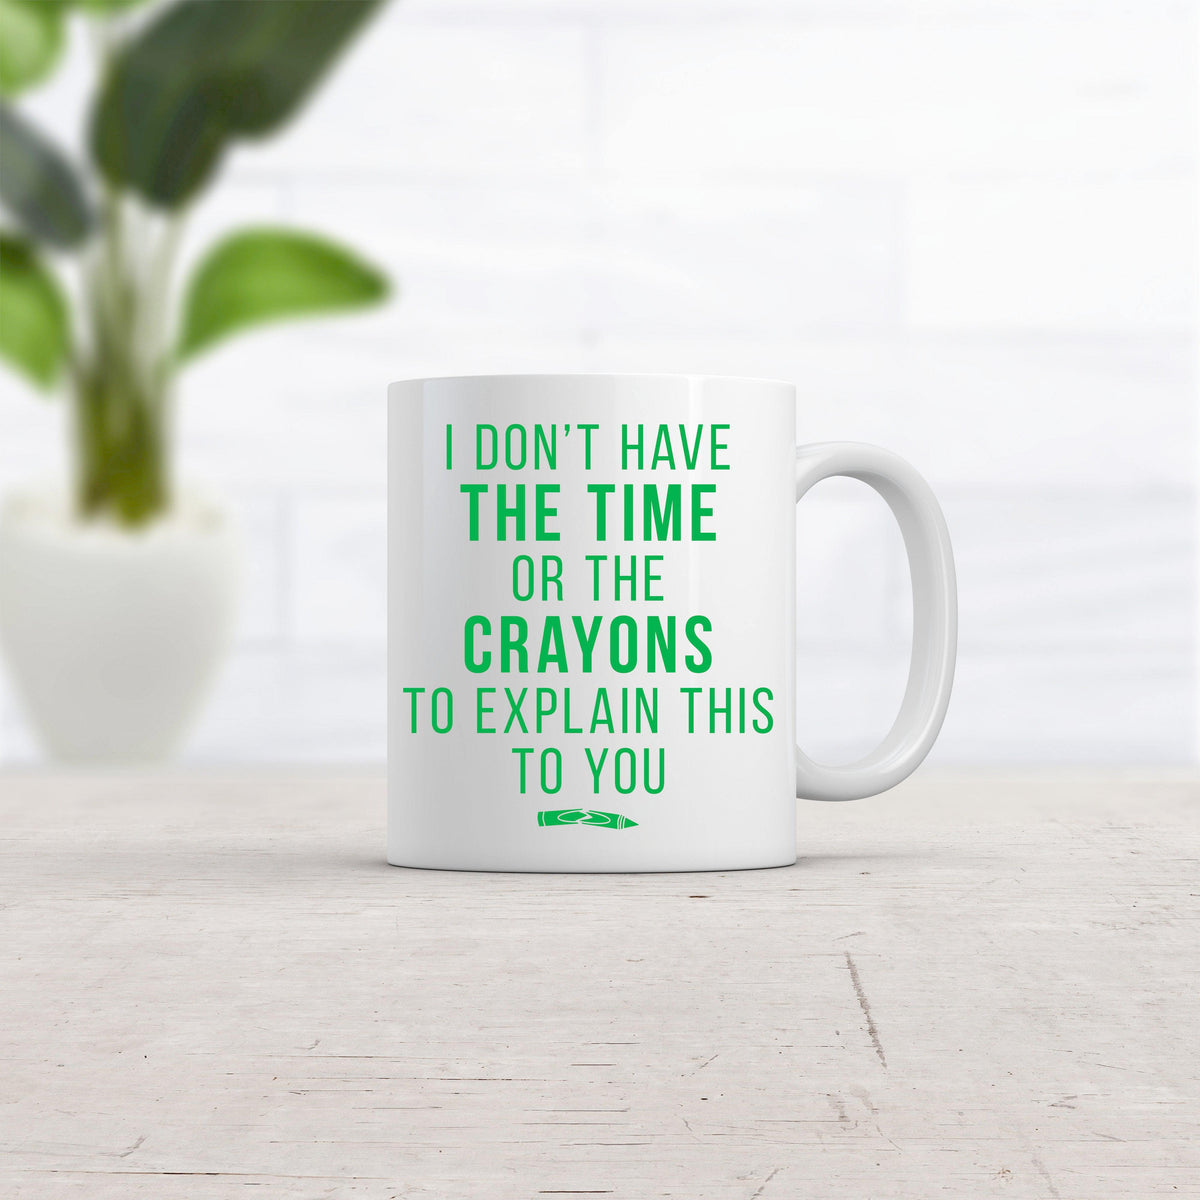 Don’t Have The Time Or The Crayons To Explain This To You Mug Funny Coffee Cup-11oz  -  Crazy Dog T-Shirts